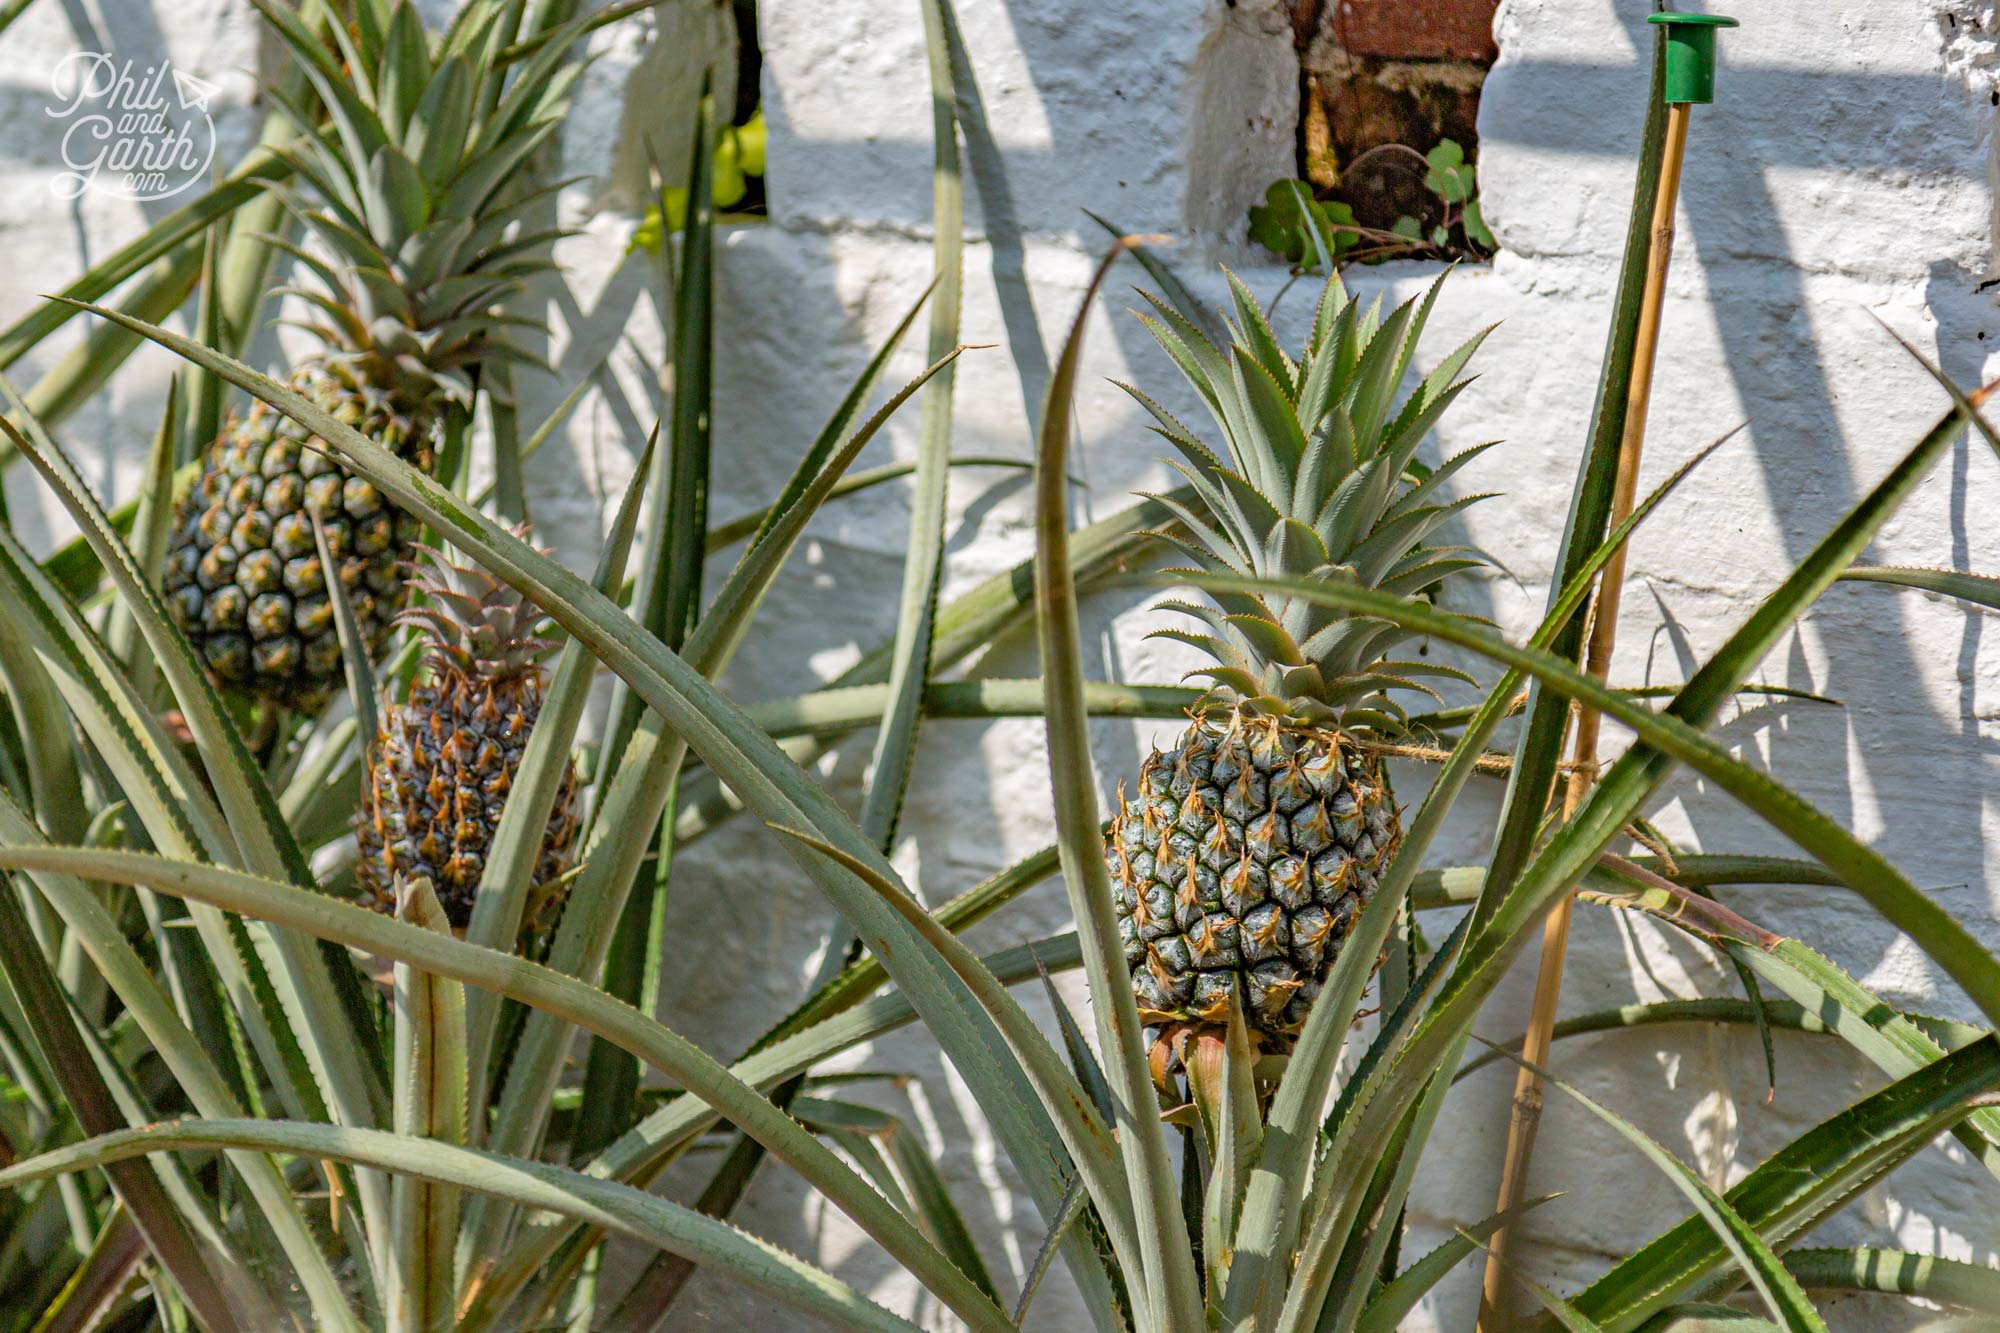 These pineapples look ready to pick